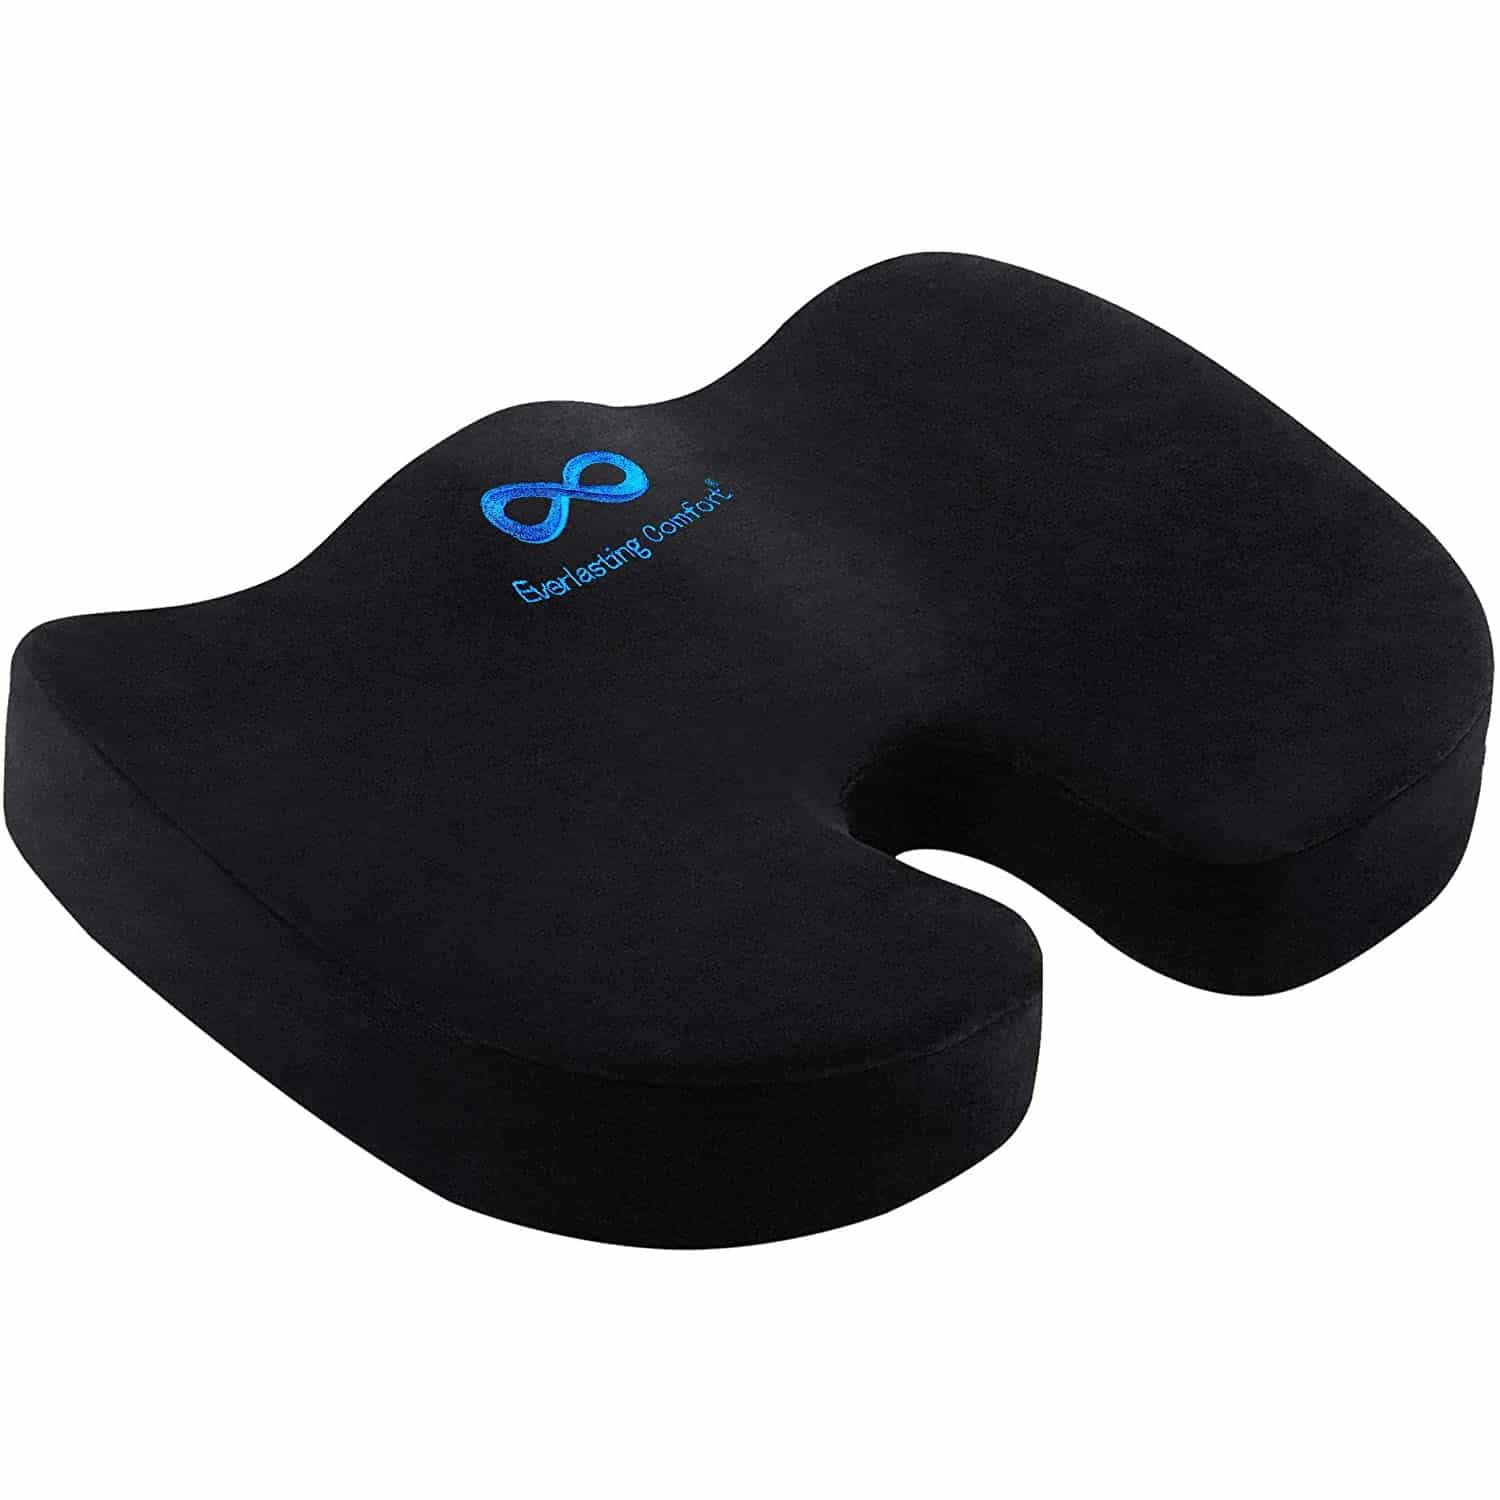 Top 10 Best Donut Pillows in 2021 Reviews | Buying Guide